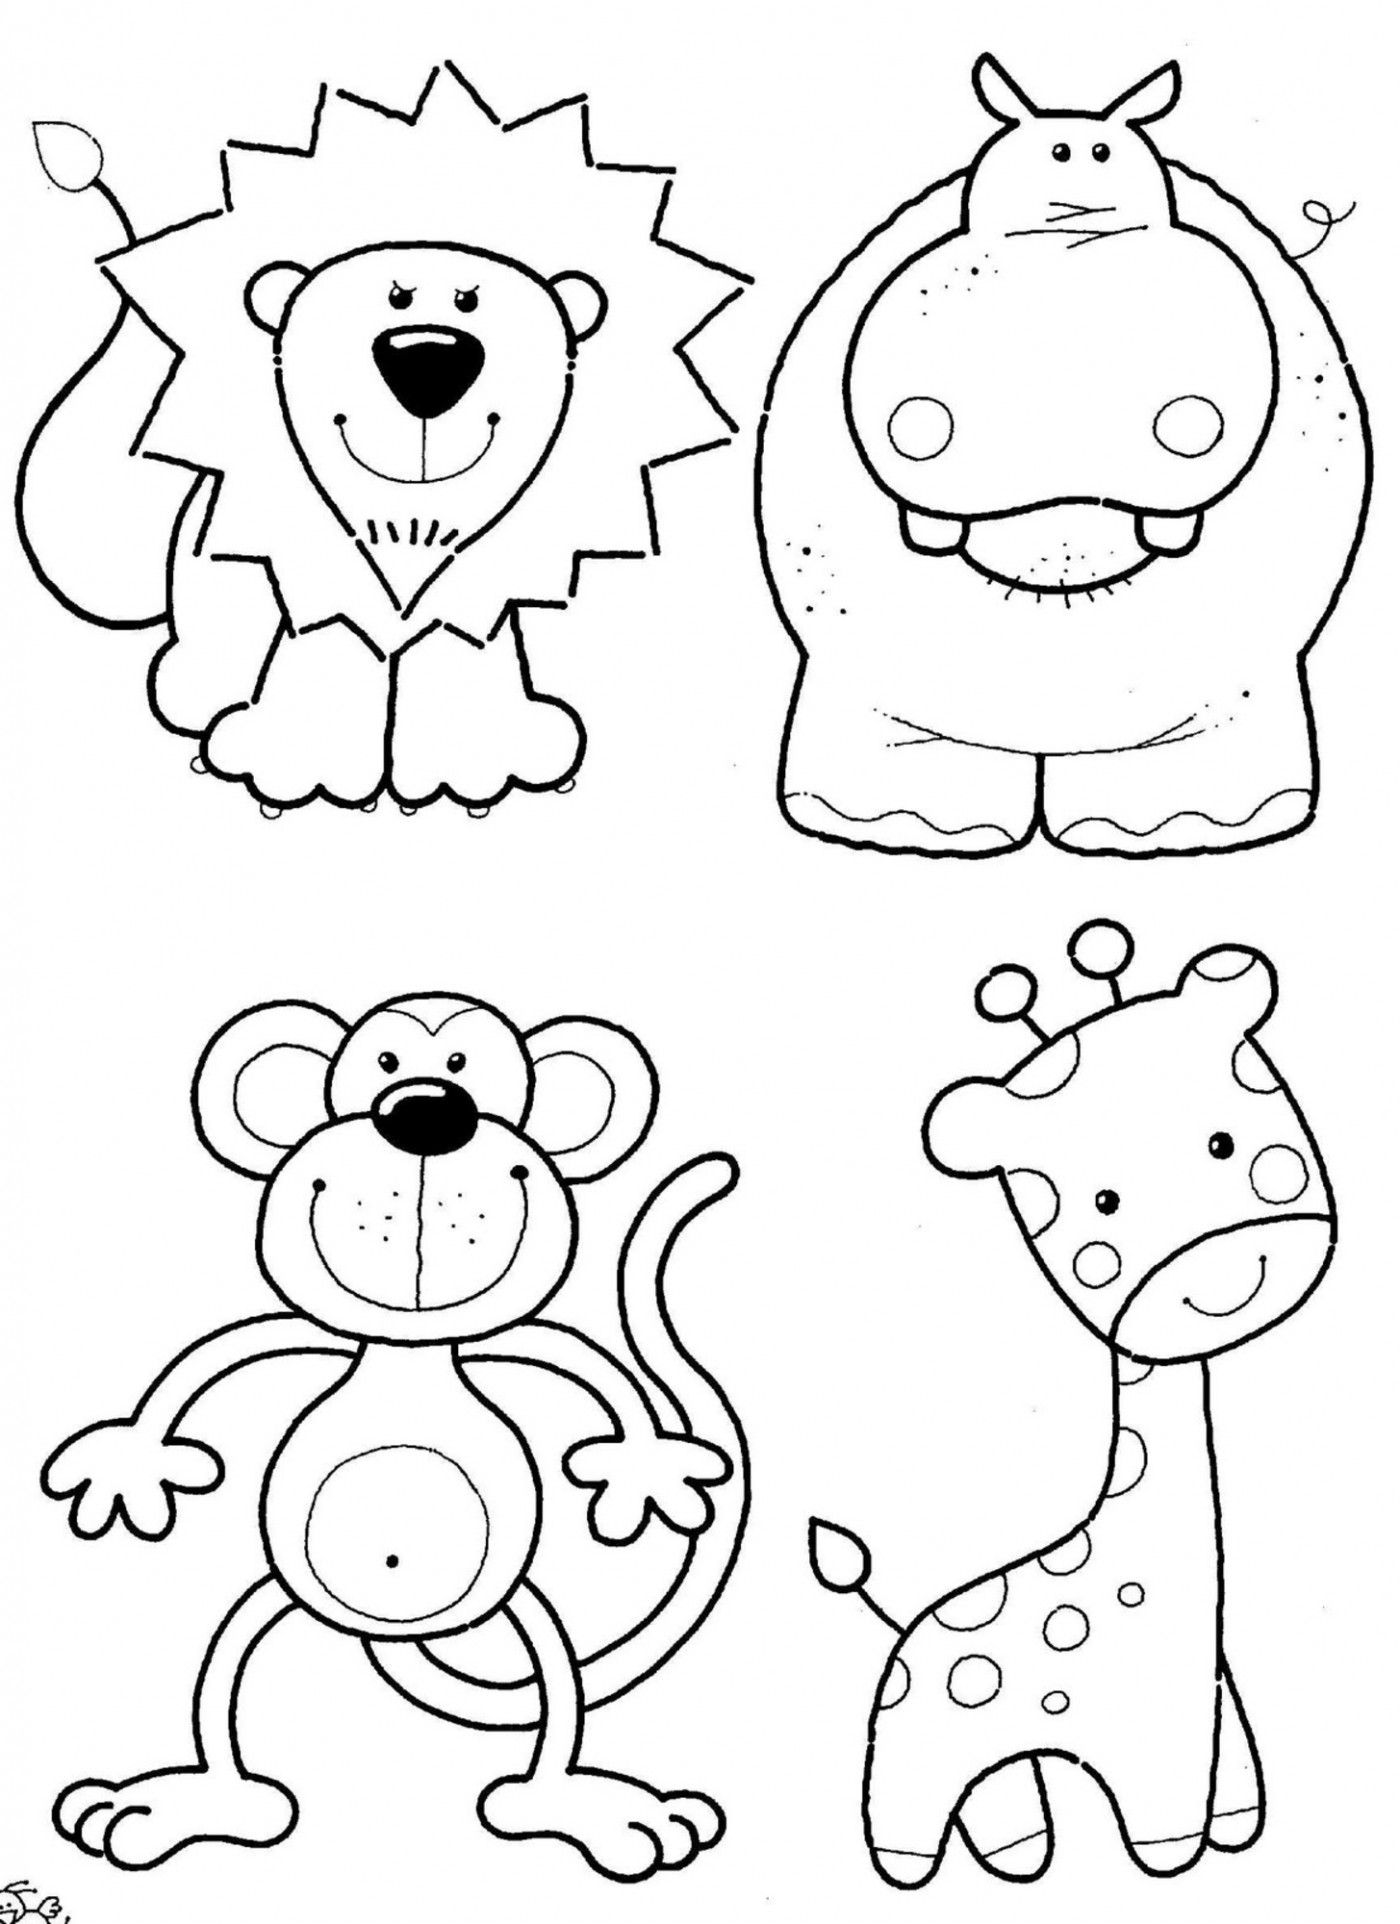 Coloring Book Images